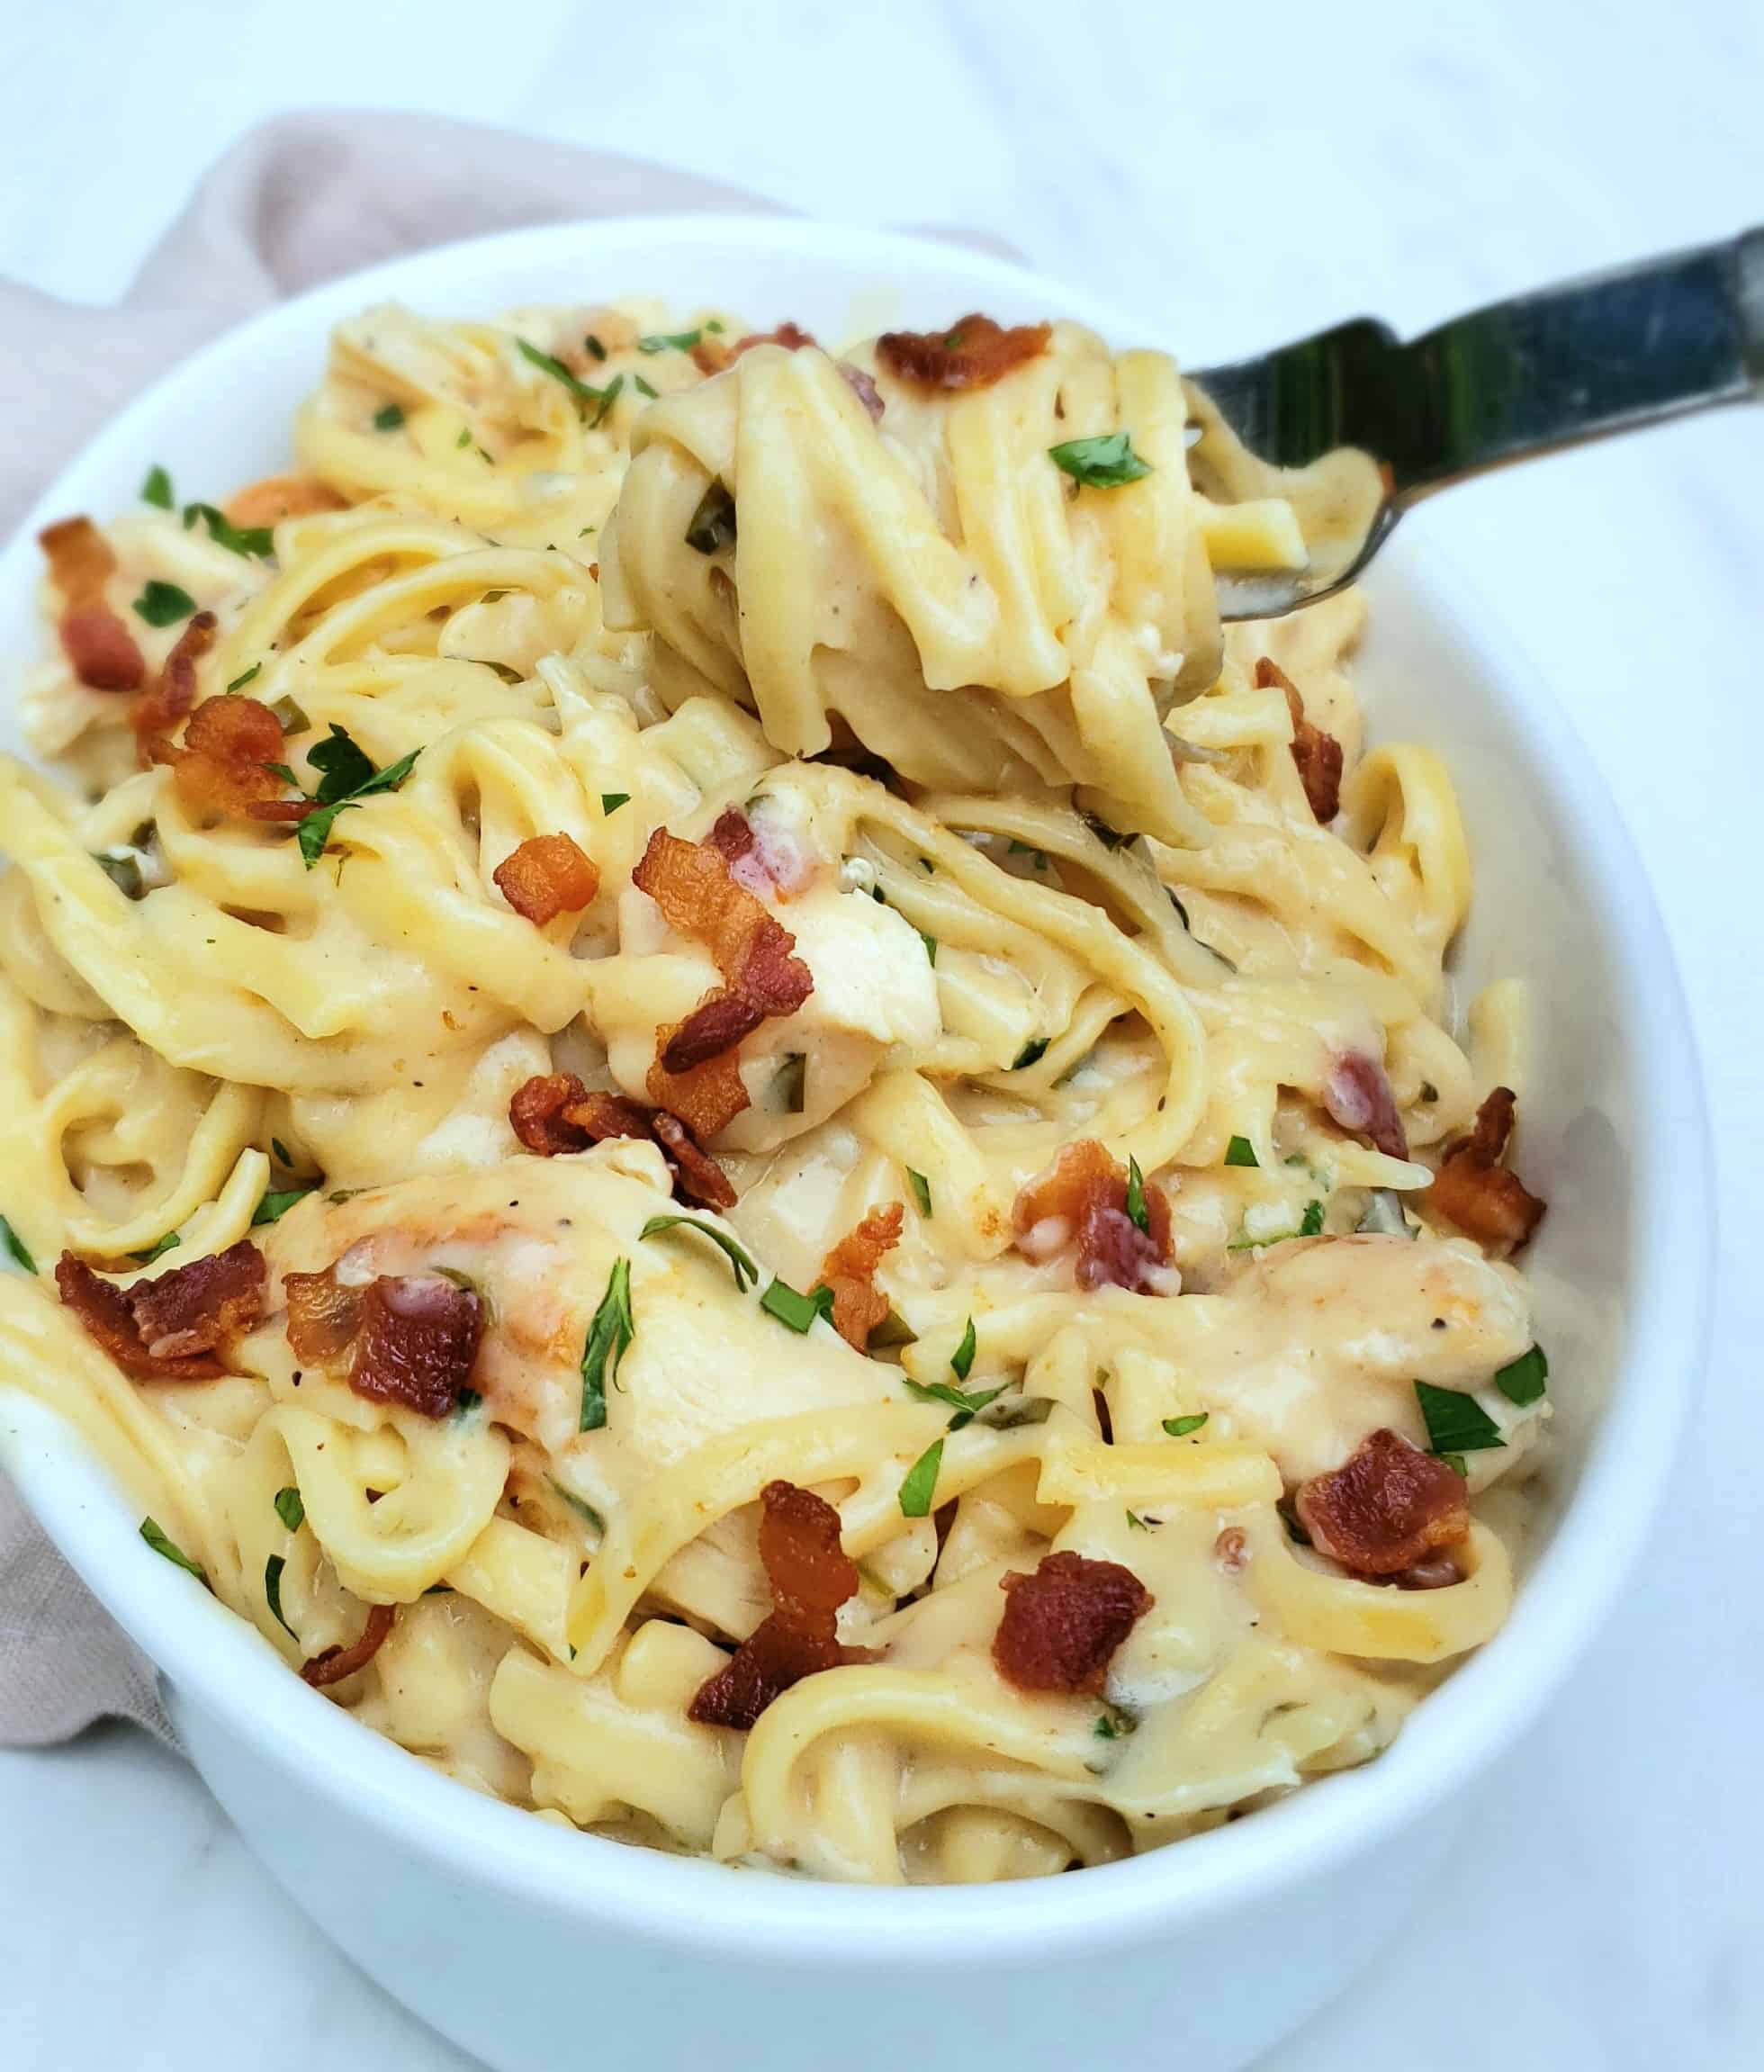 Chicken Bacon Ranch Alfredo made in the Instant Pot! Here in a white casserole dish